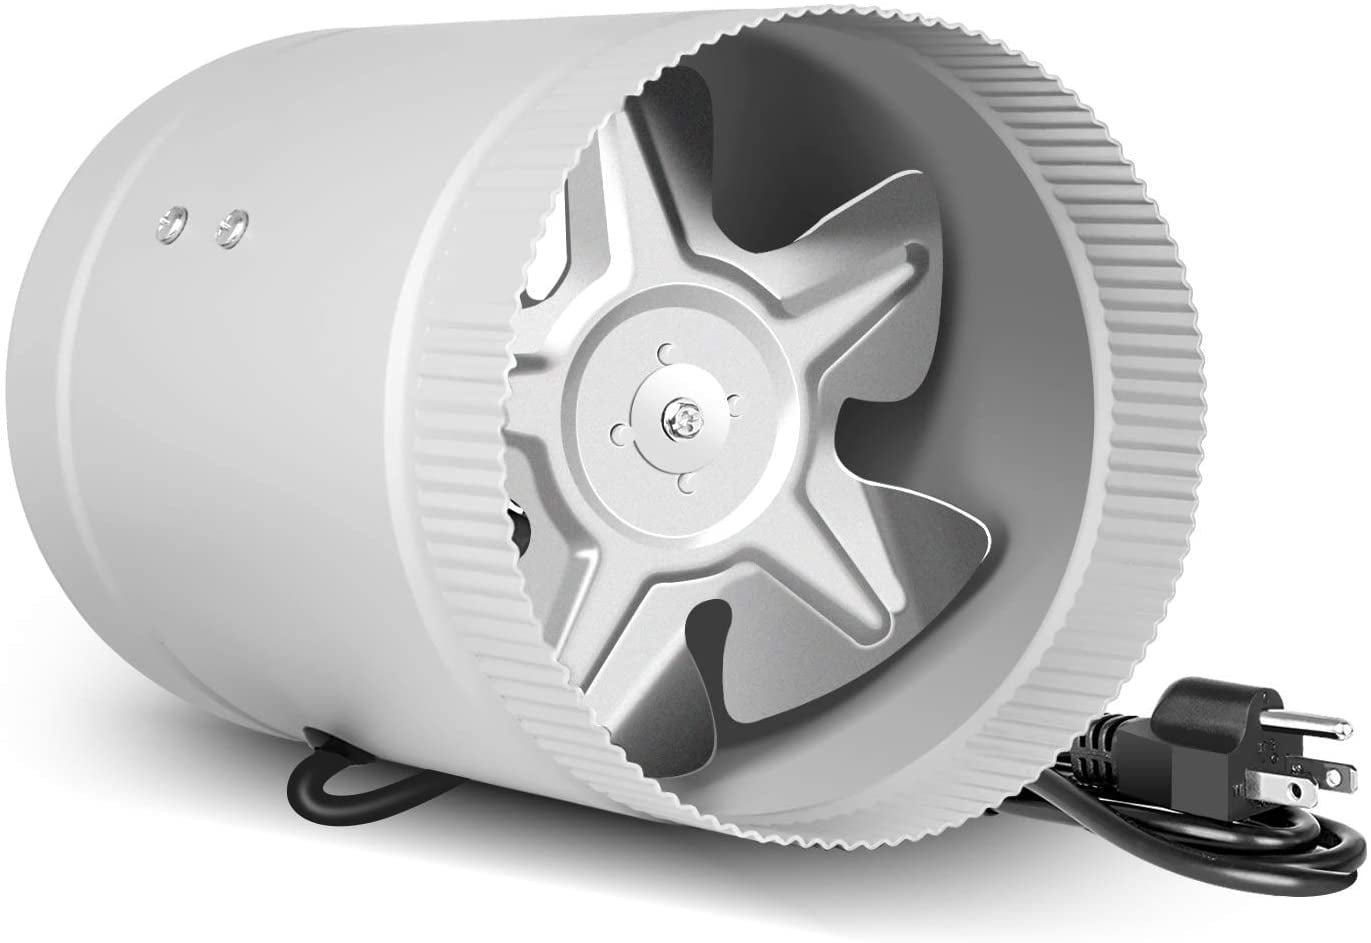 4 inch Inl.ine Duct Booster Fan Ventilation Exhaust Air Blower HOT SALE!! 